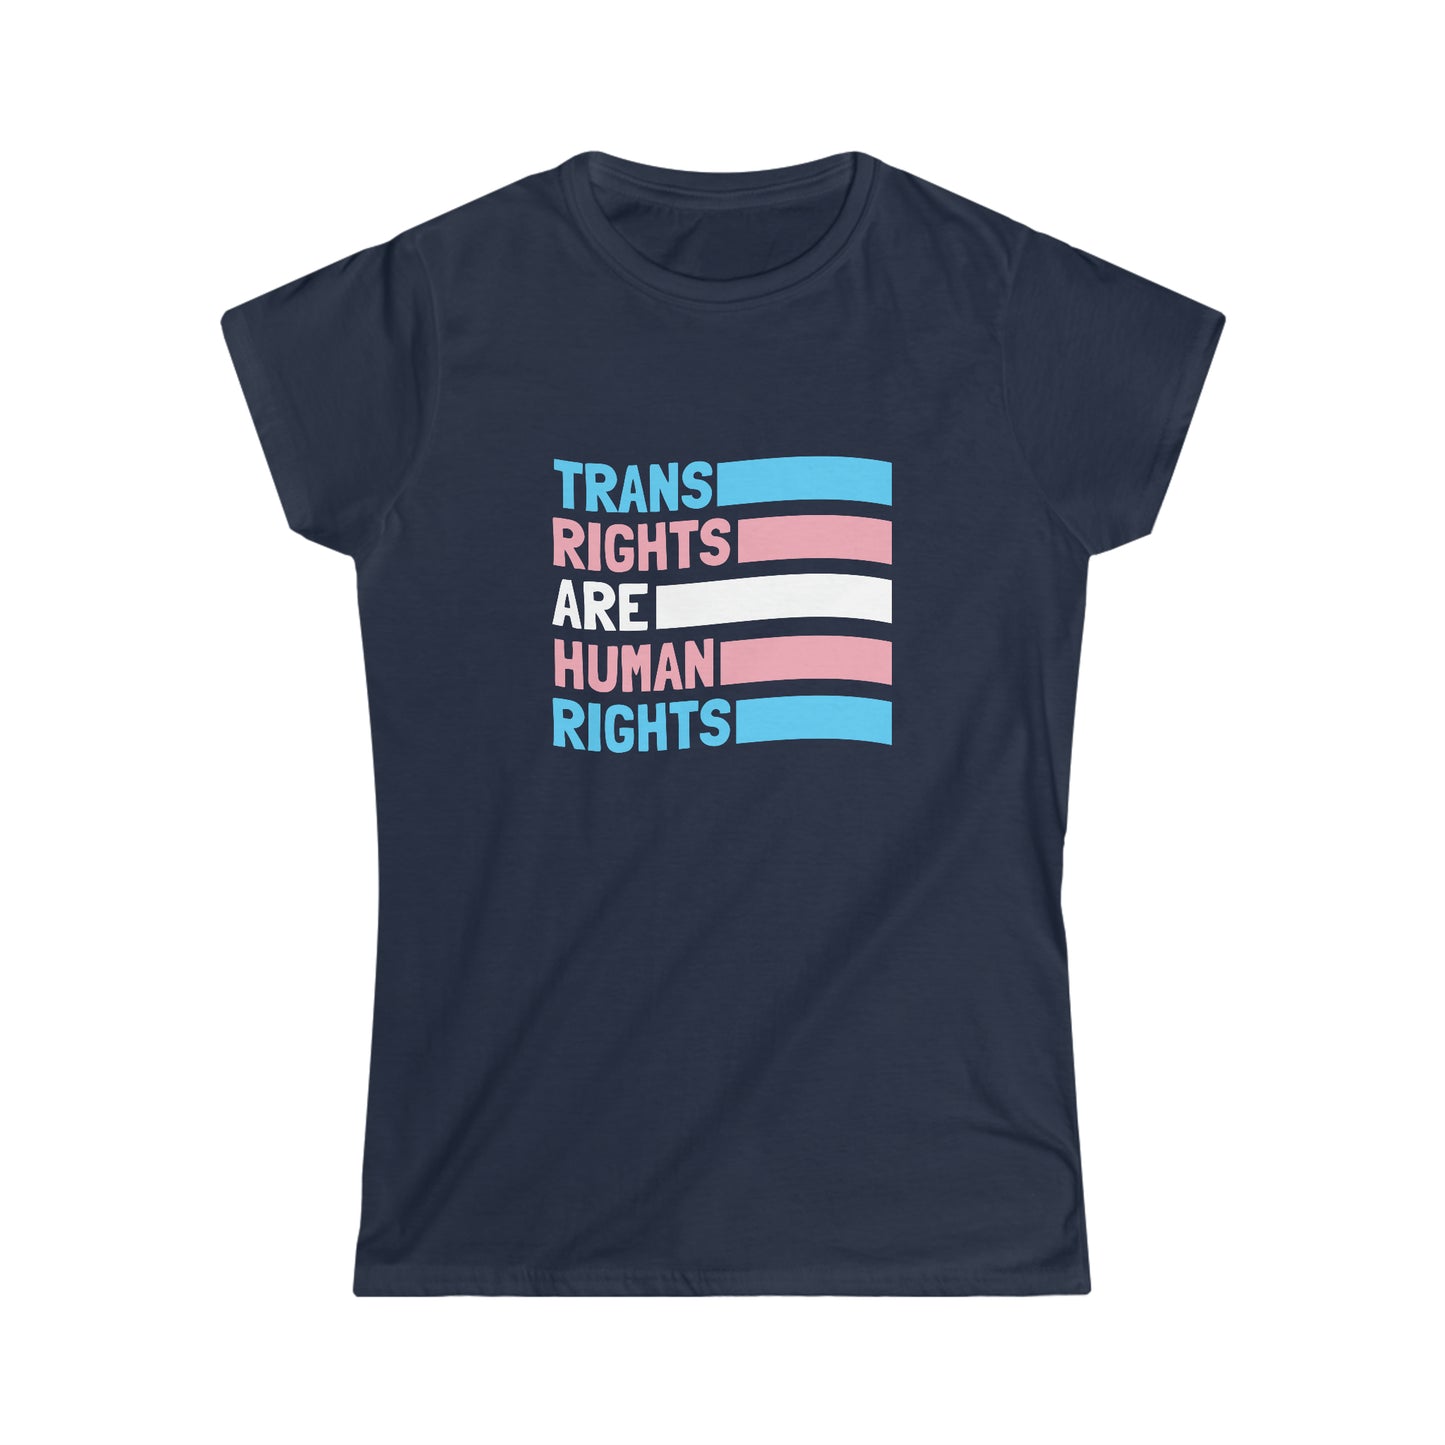 “Trans Rights Are Human Rights” Women’s T-Shirts